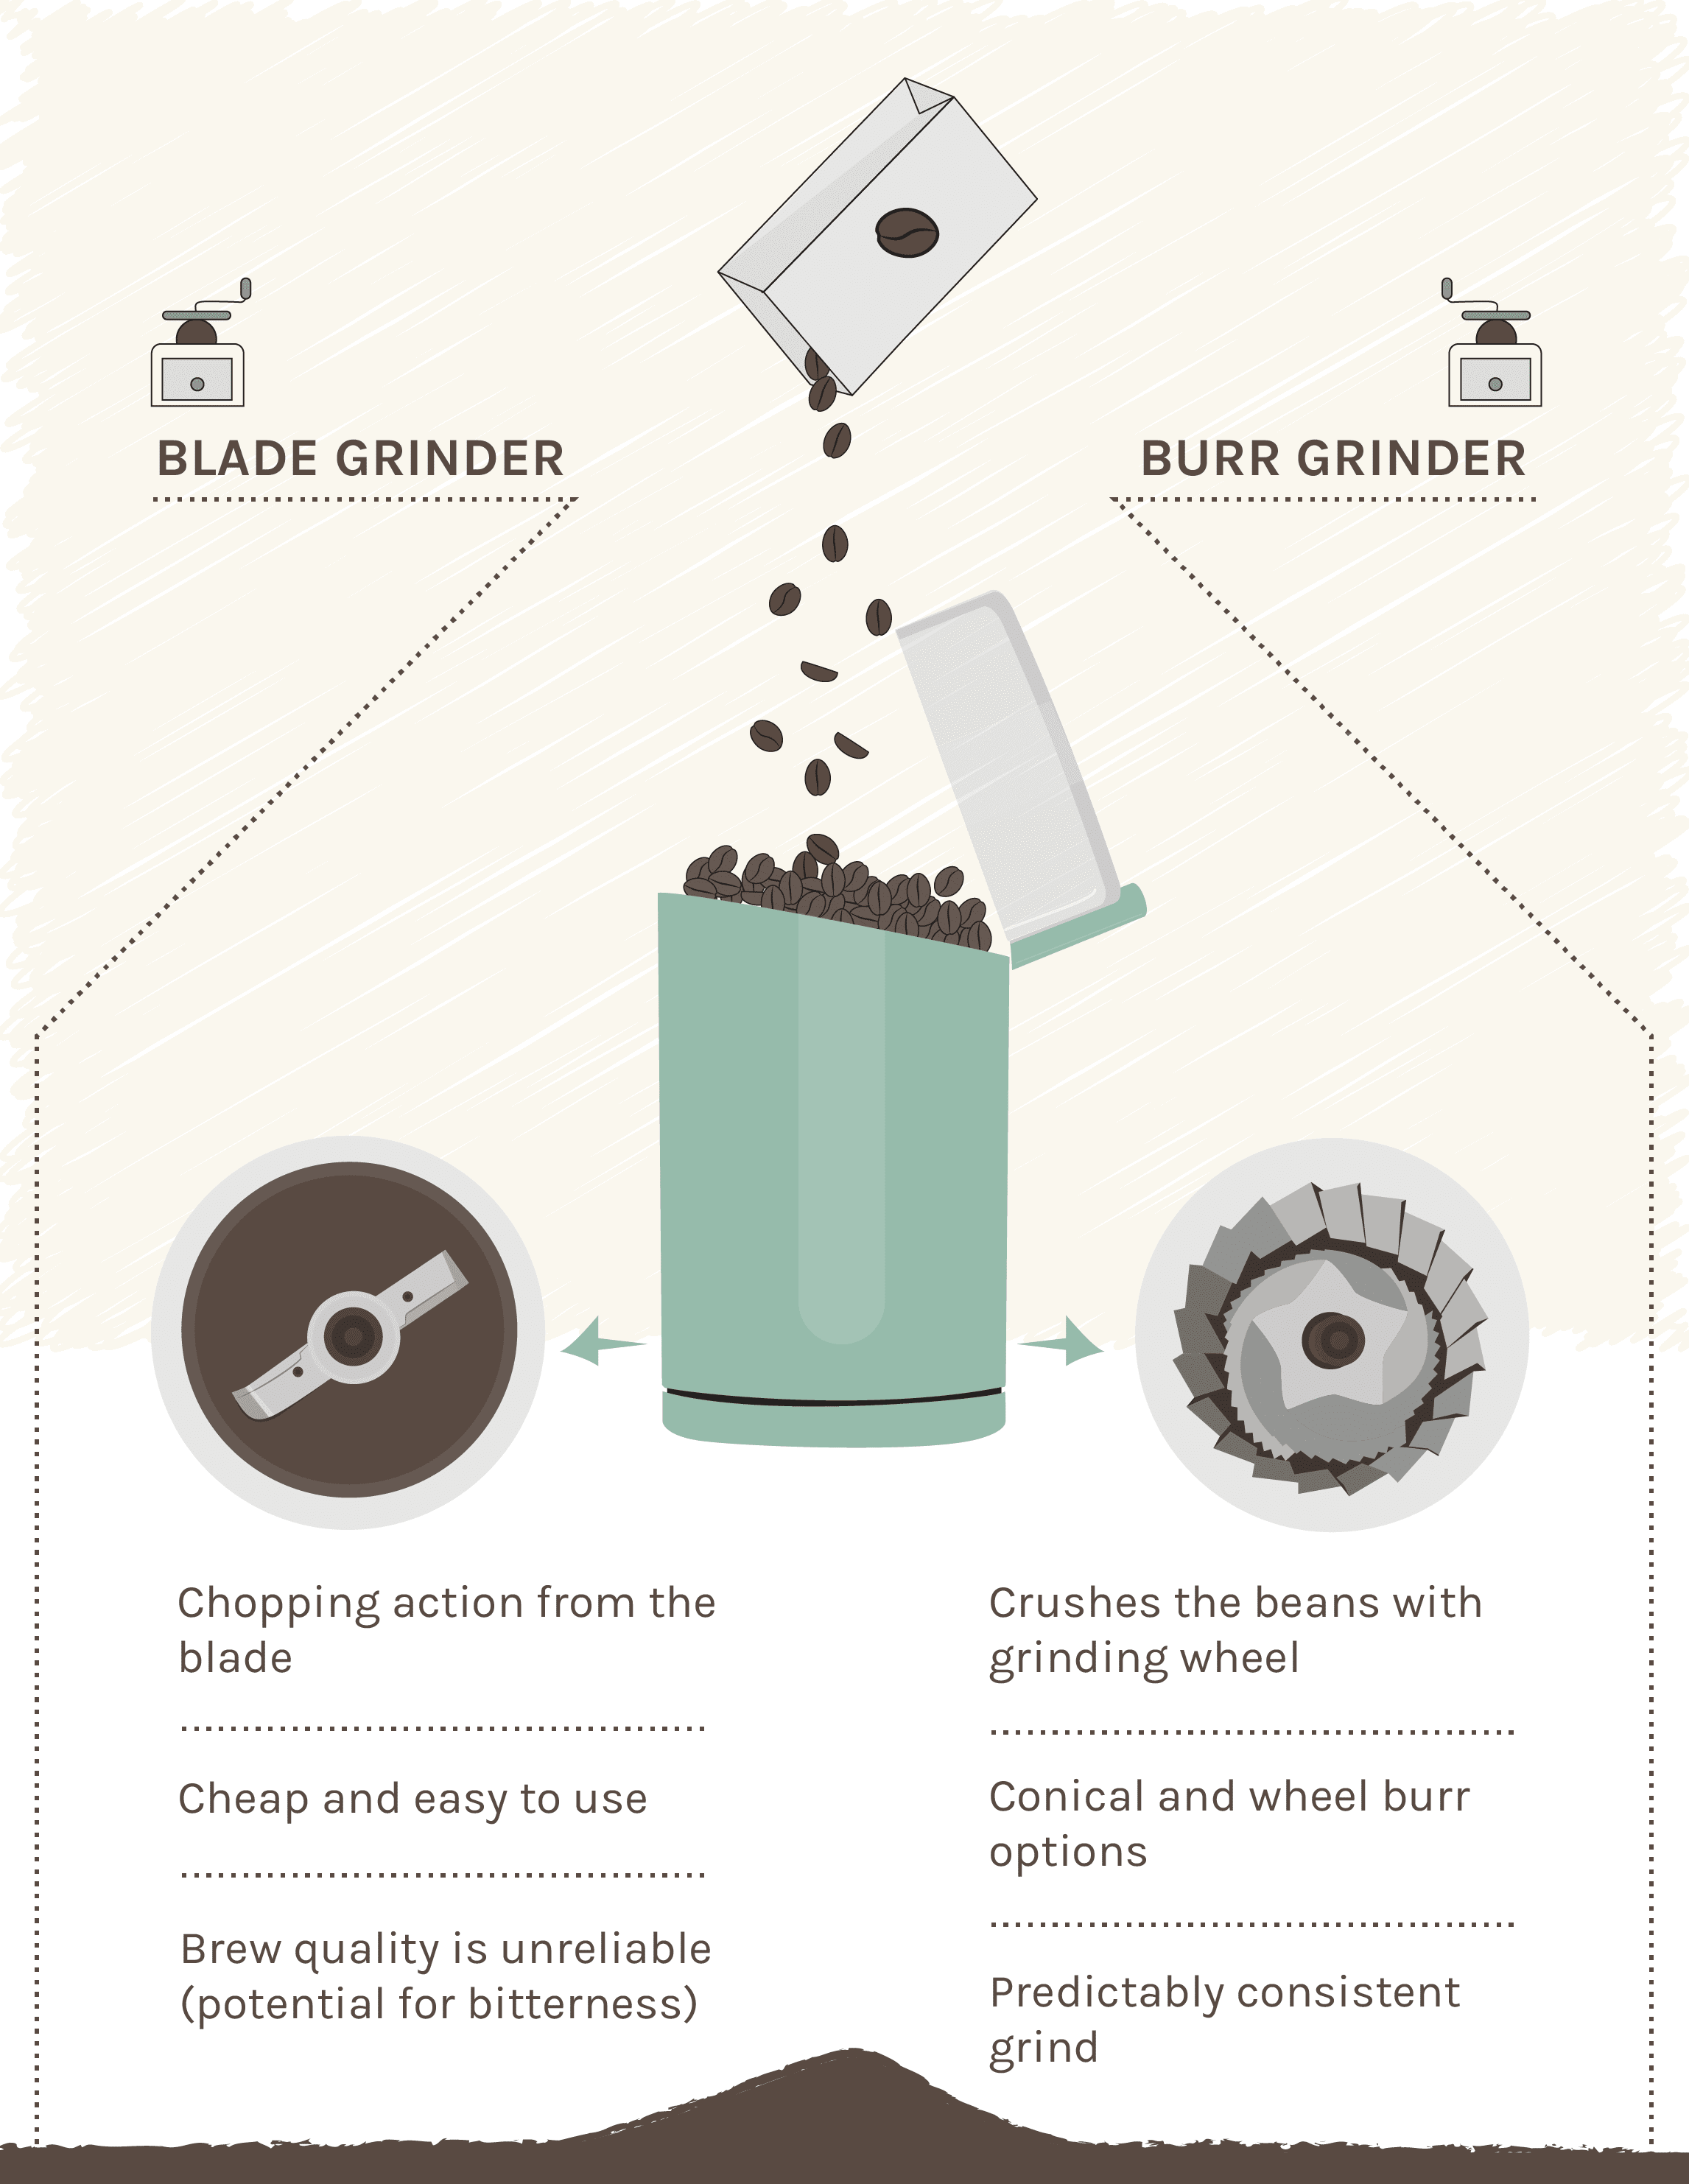 Why Not To Use Blade Grinder With Coffee?